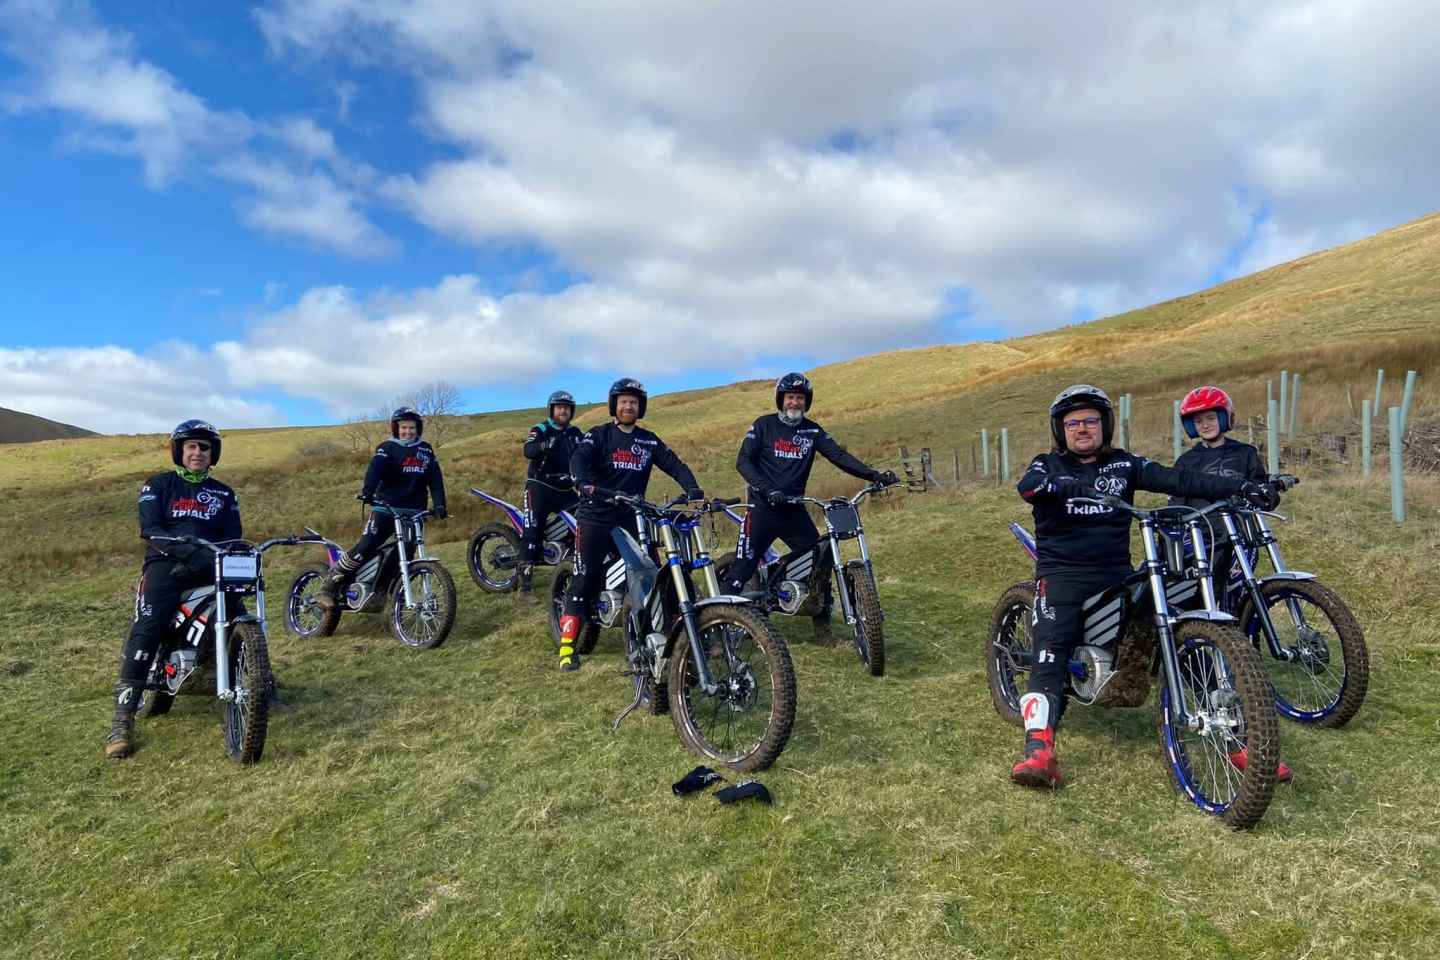 Clitheroe: Off-Road Motorbike Experience with Guide & Lunch